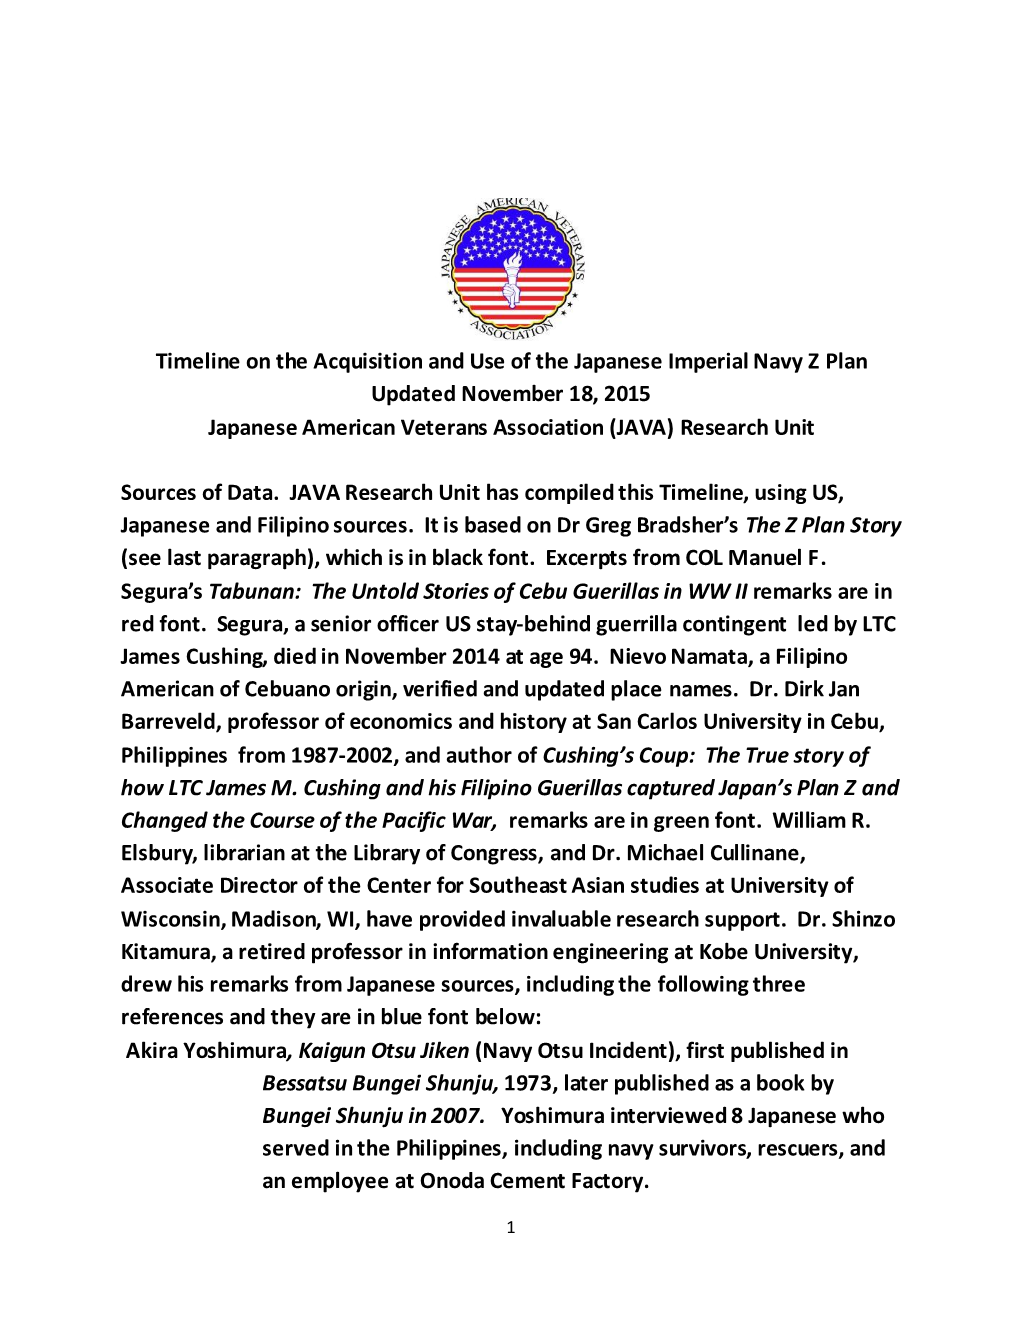 Timeline on the Acquisition and Use of the Japanese Imperial Navy Z Plan Updated November 18, 2015 Japanese American Veterans Association (JAVA) Research Unit